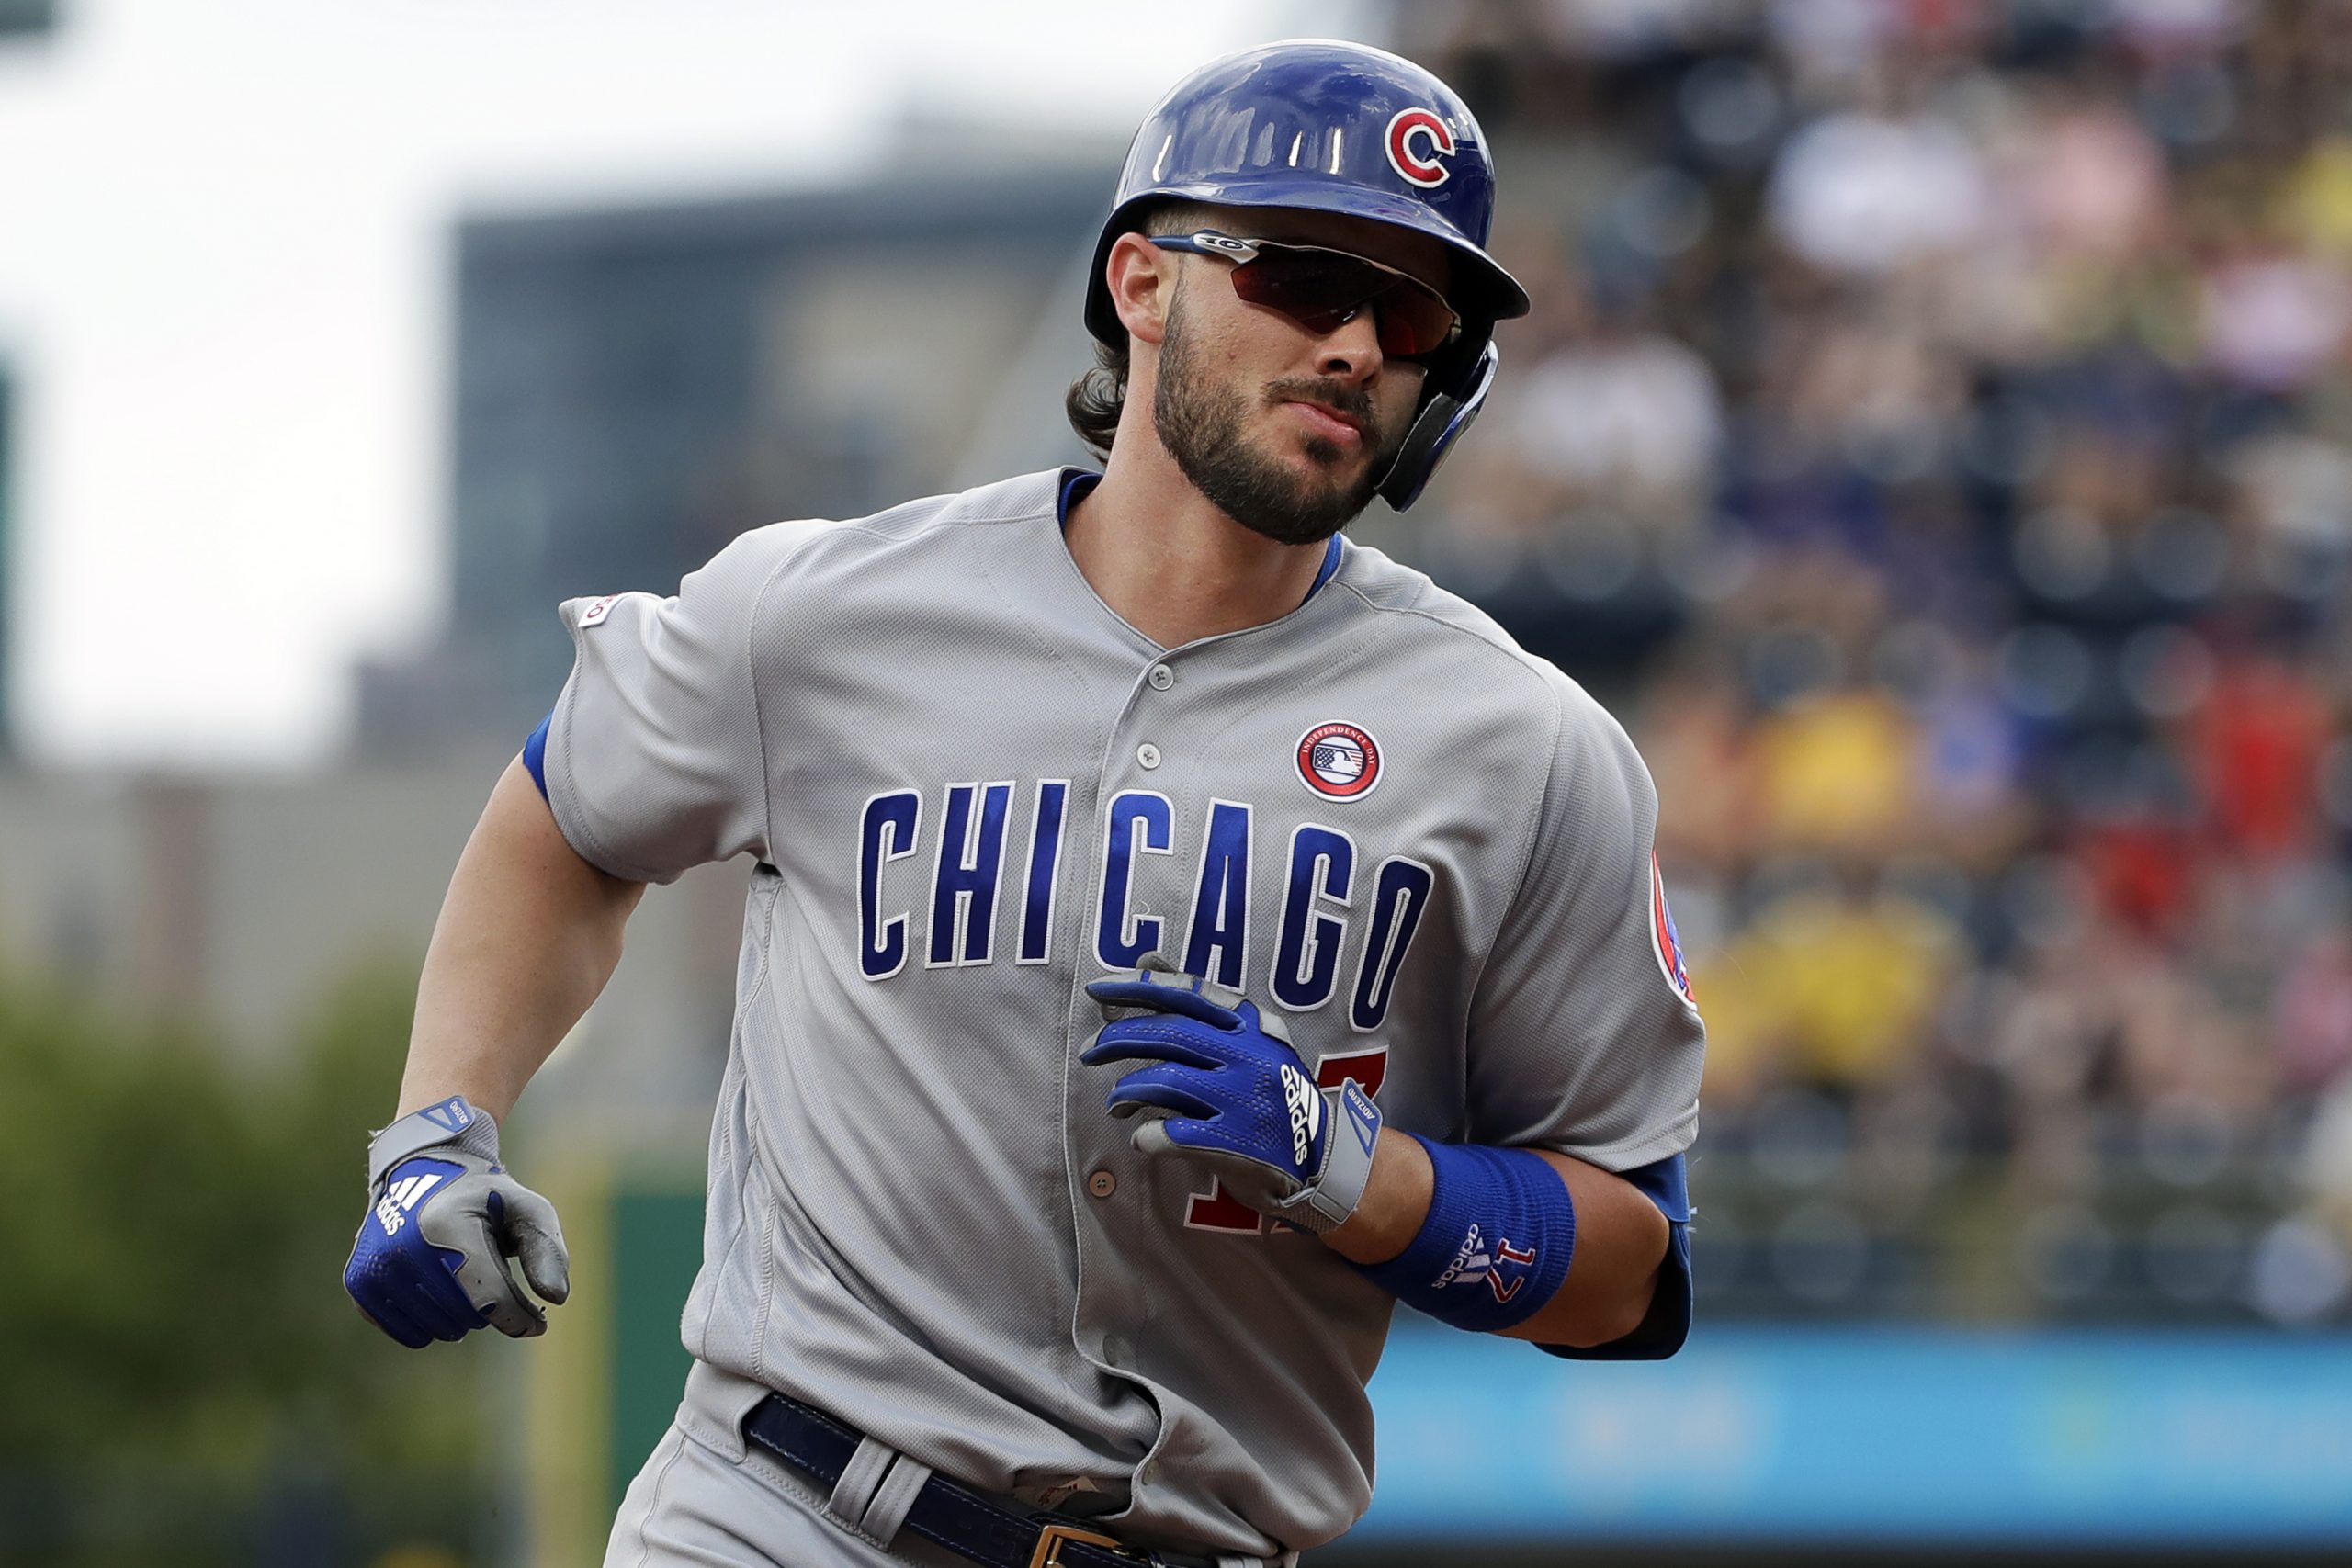 With NL East circling around Kris Bryant, Mets have most to gain